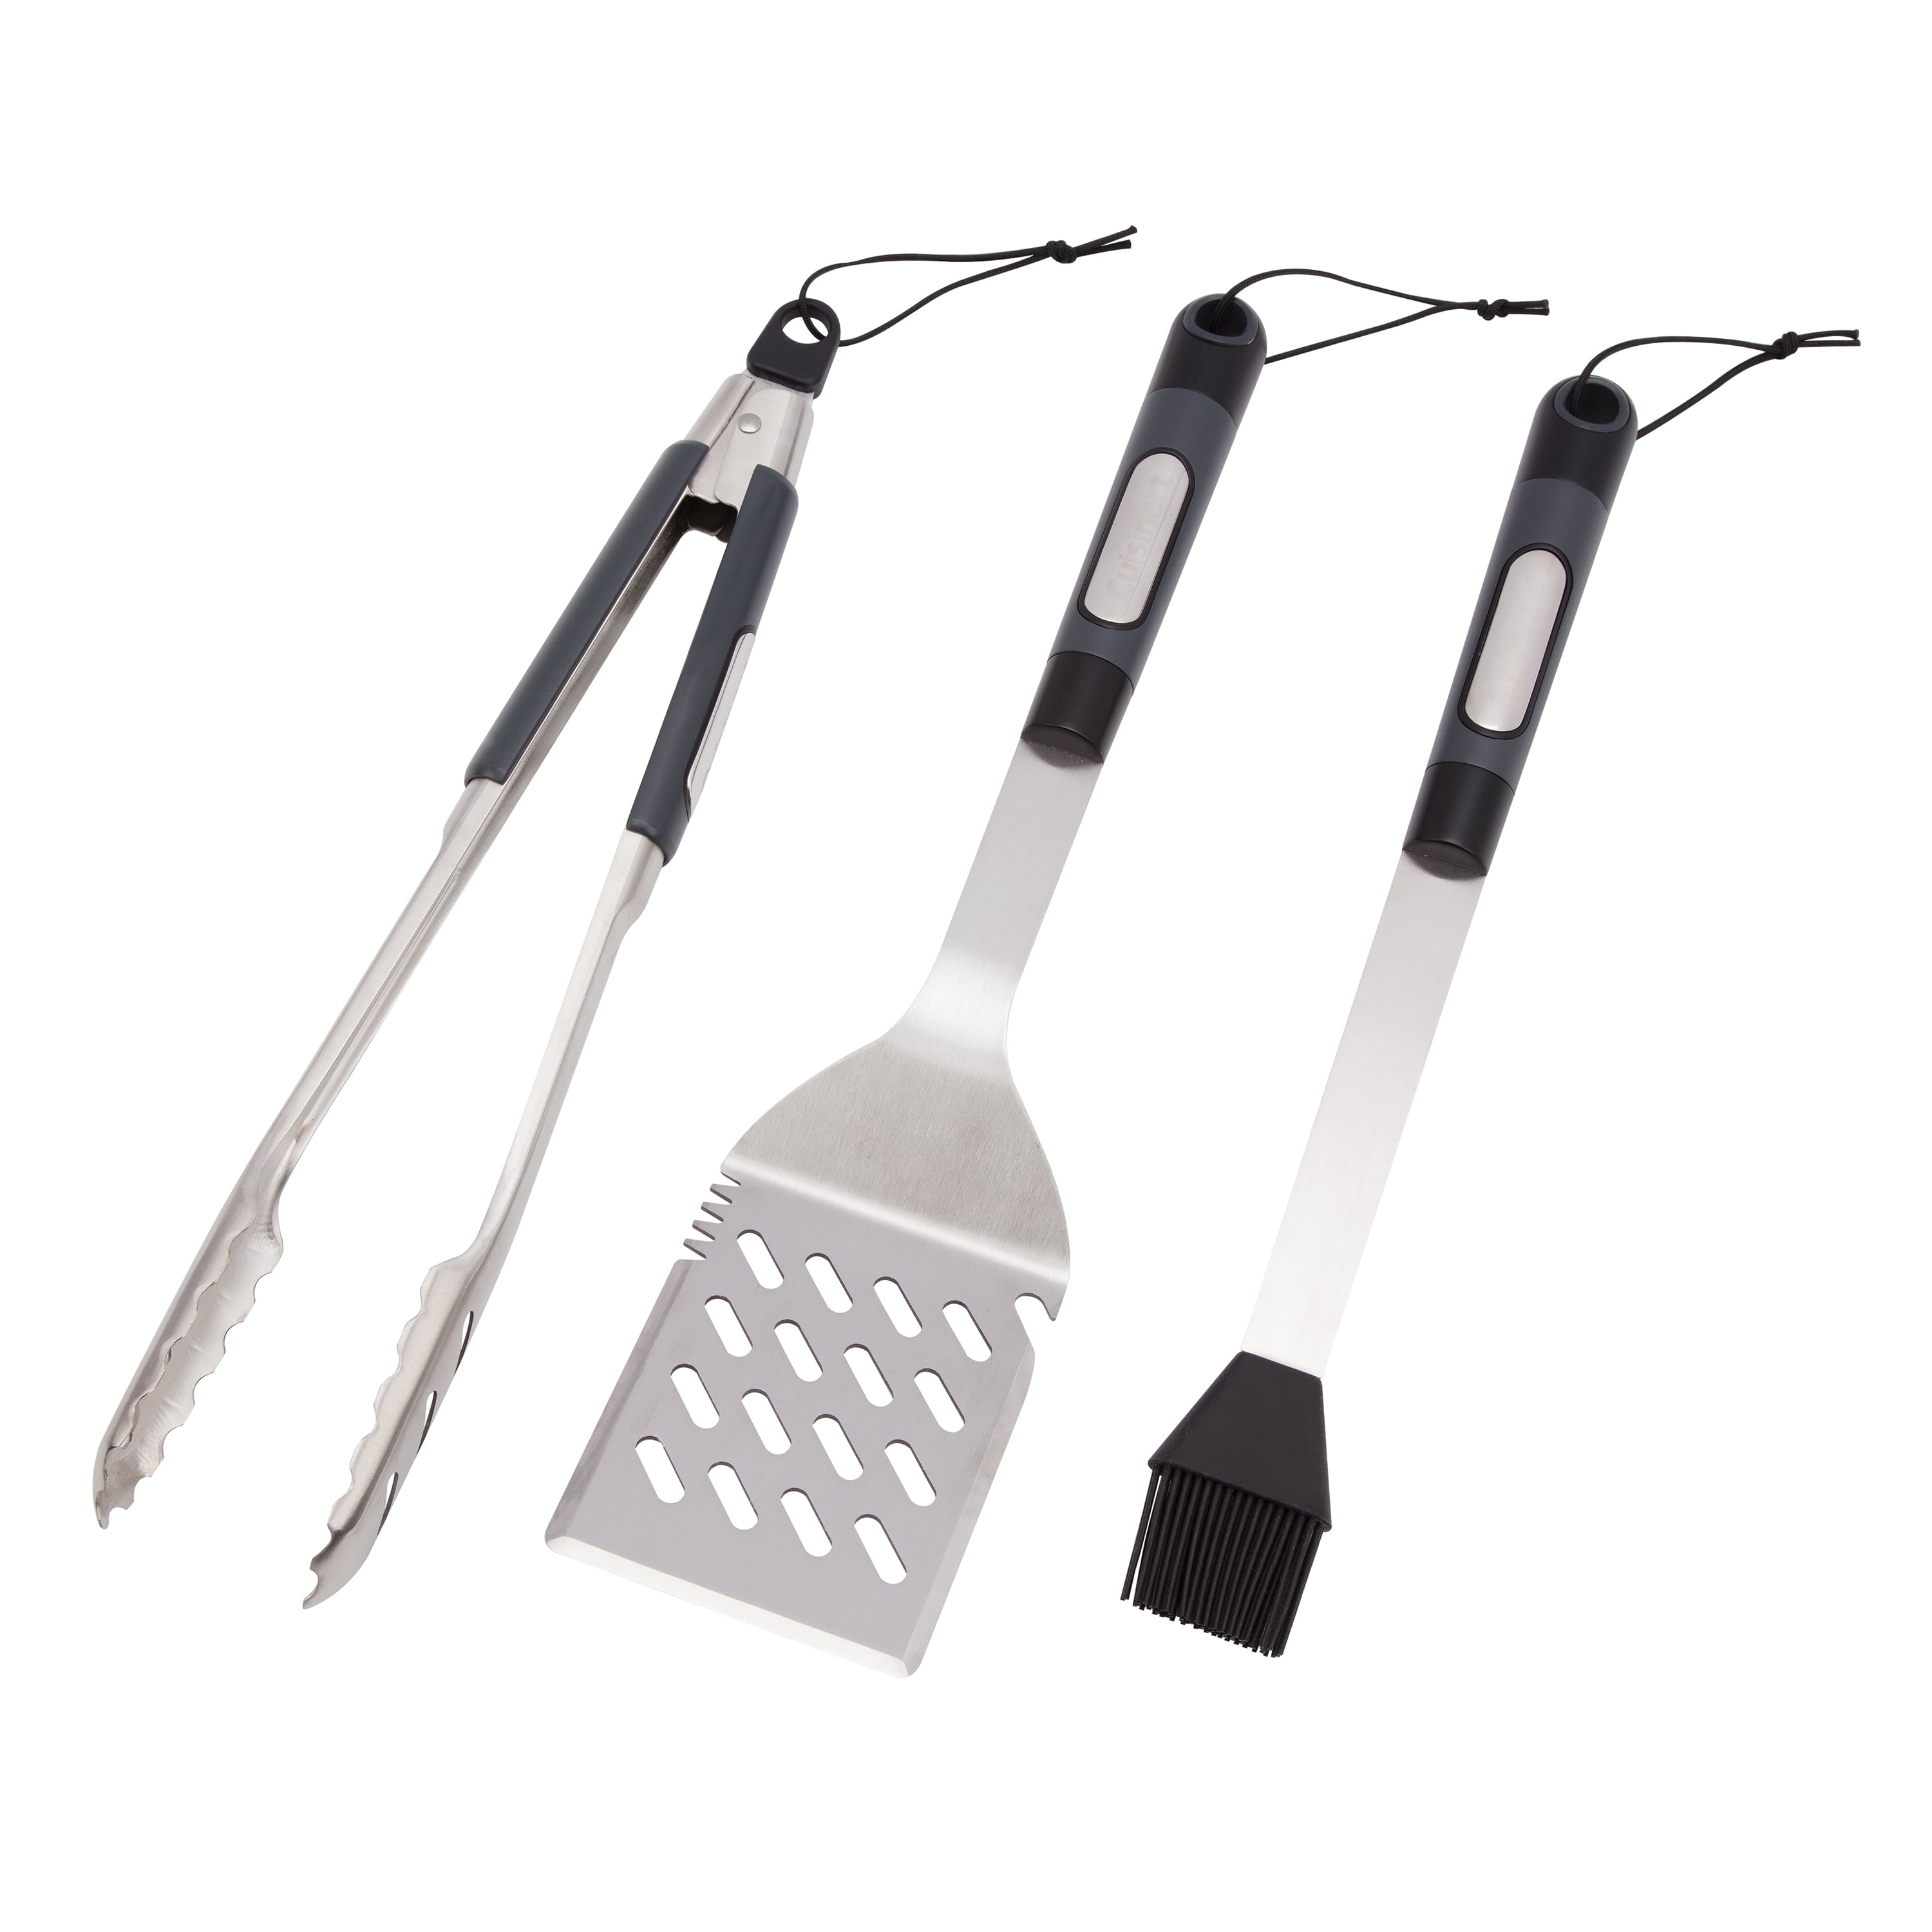 Cuisinart 3 Piece Stainless Steel Barbecue Tool Set - Set Includes Spatula Locking Tongs and A Silicon Basting Brush